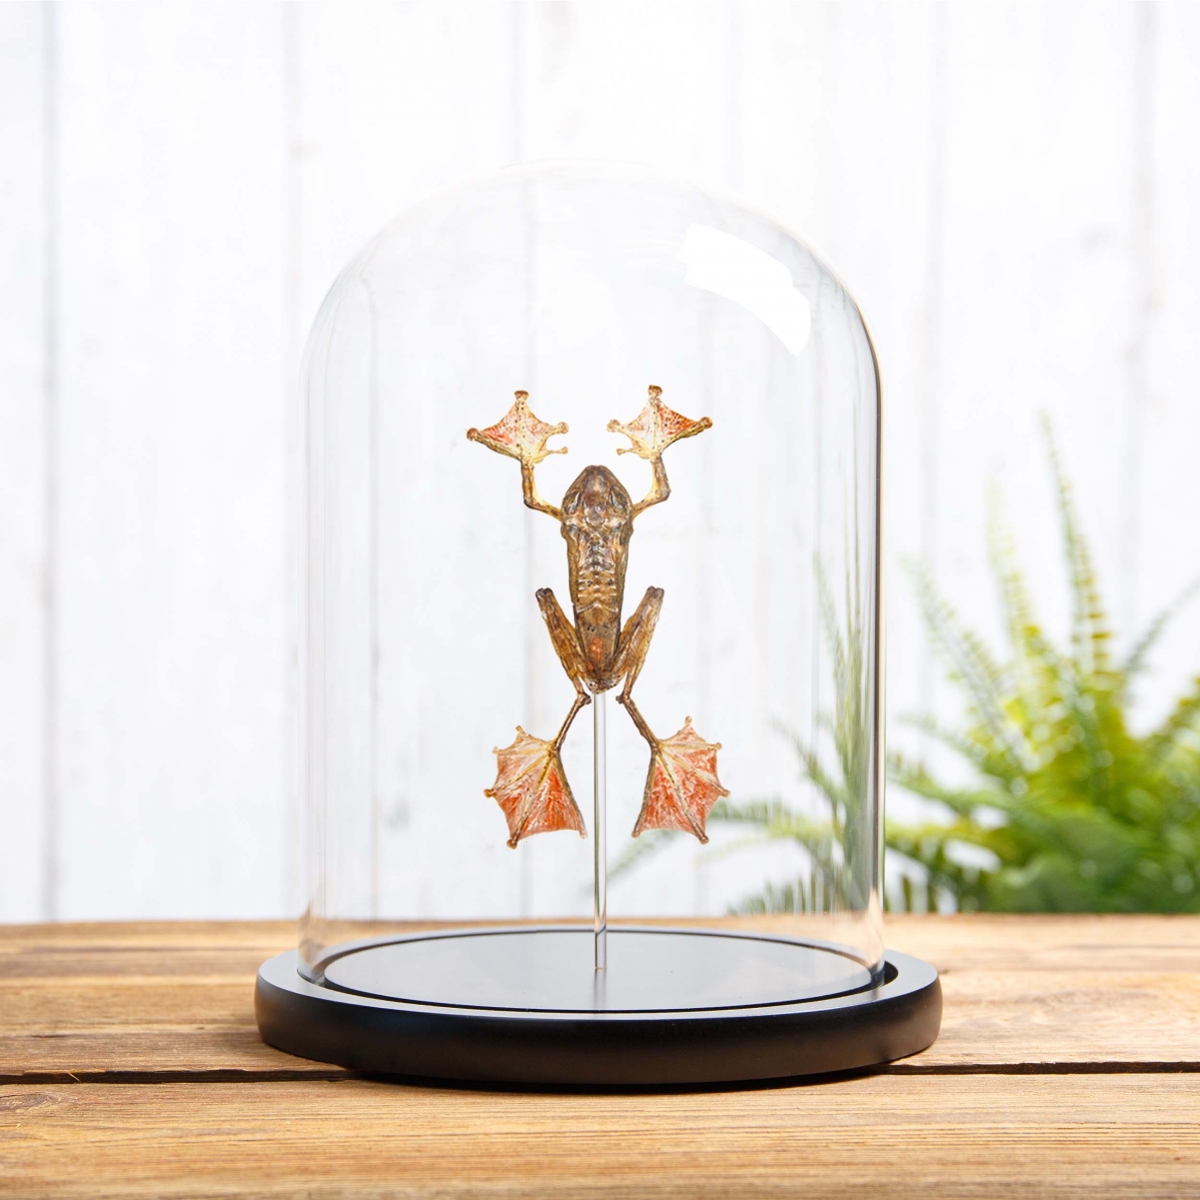 Minibeast Taxidermy Harlequin Tree Frog in Glass Dome with Wooden Base (Rhacophorus pardalis)